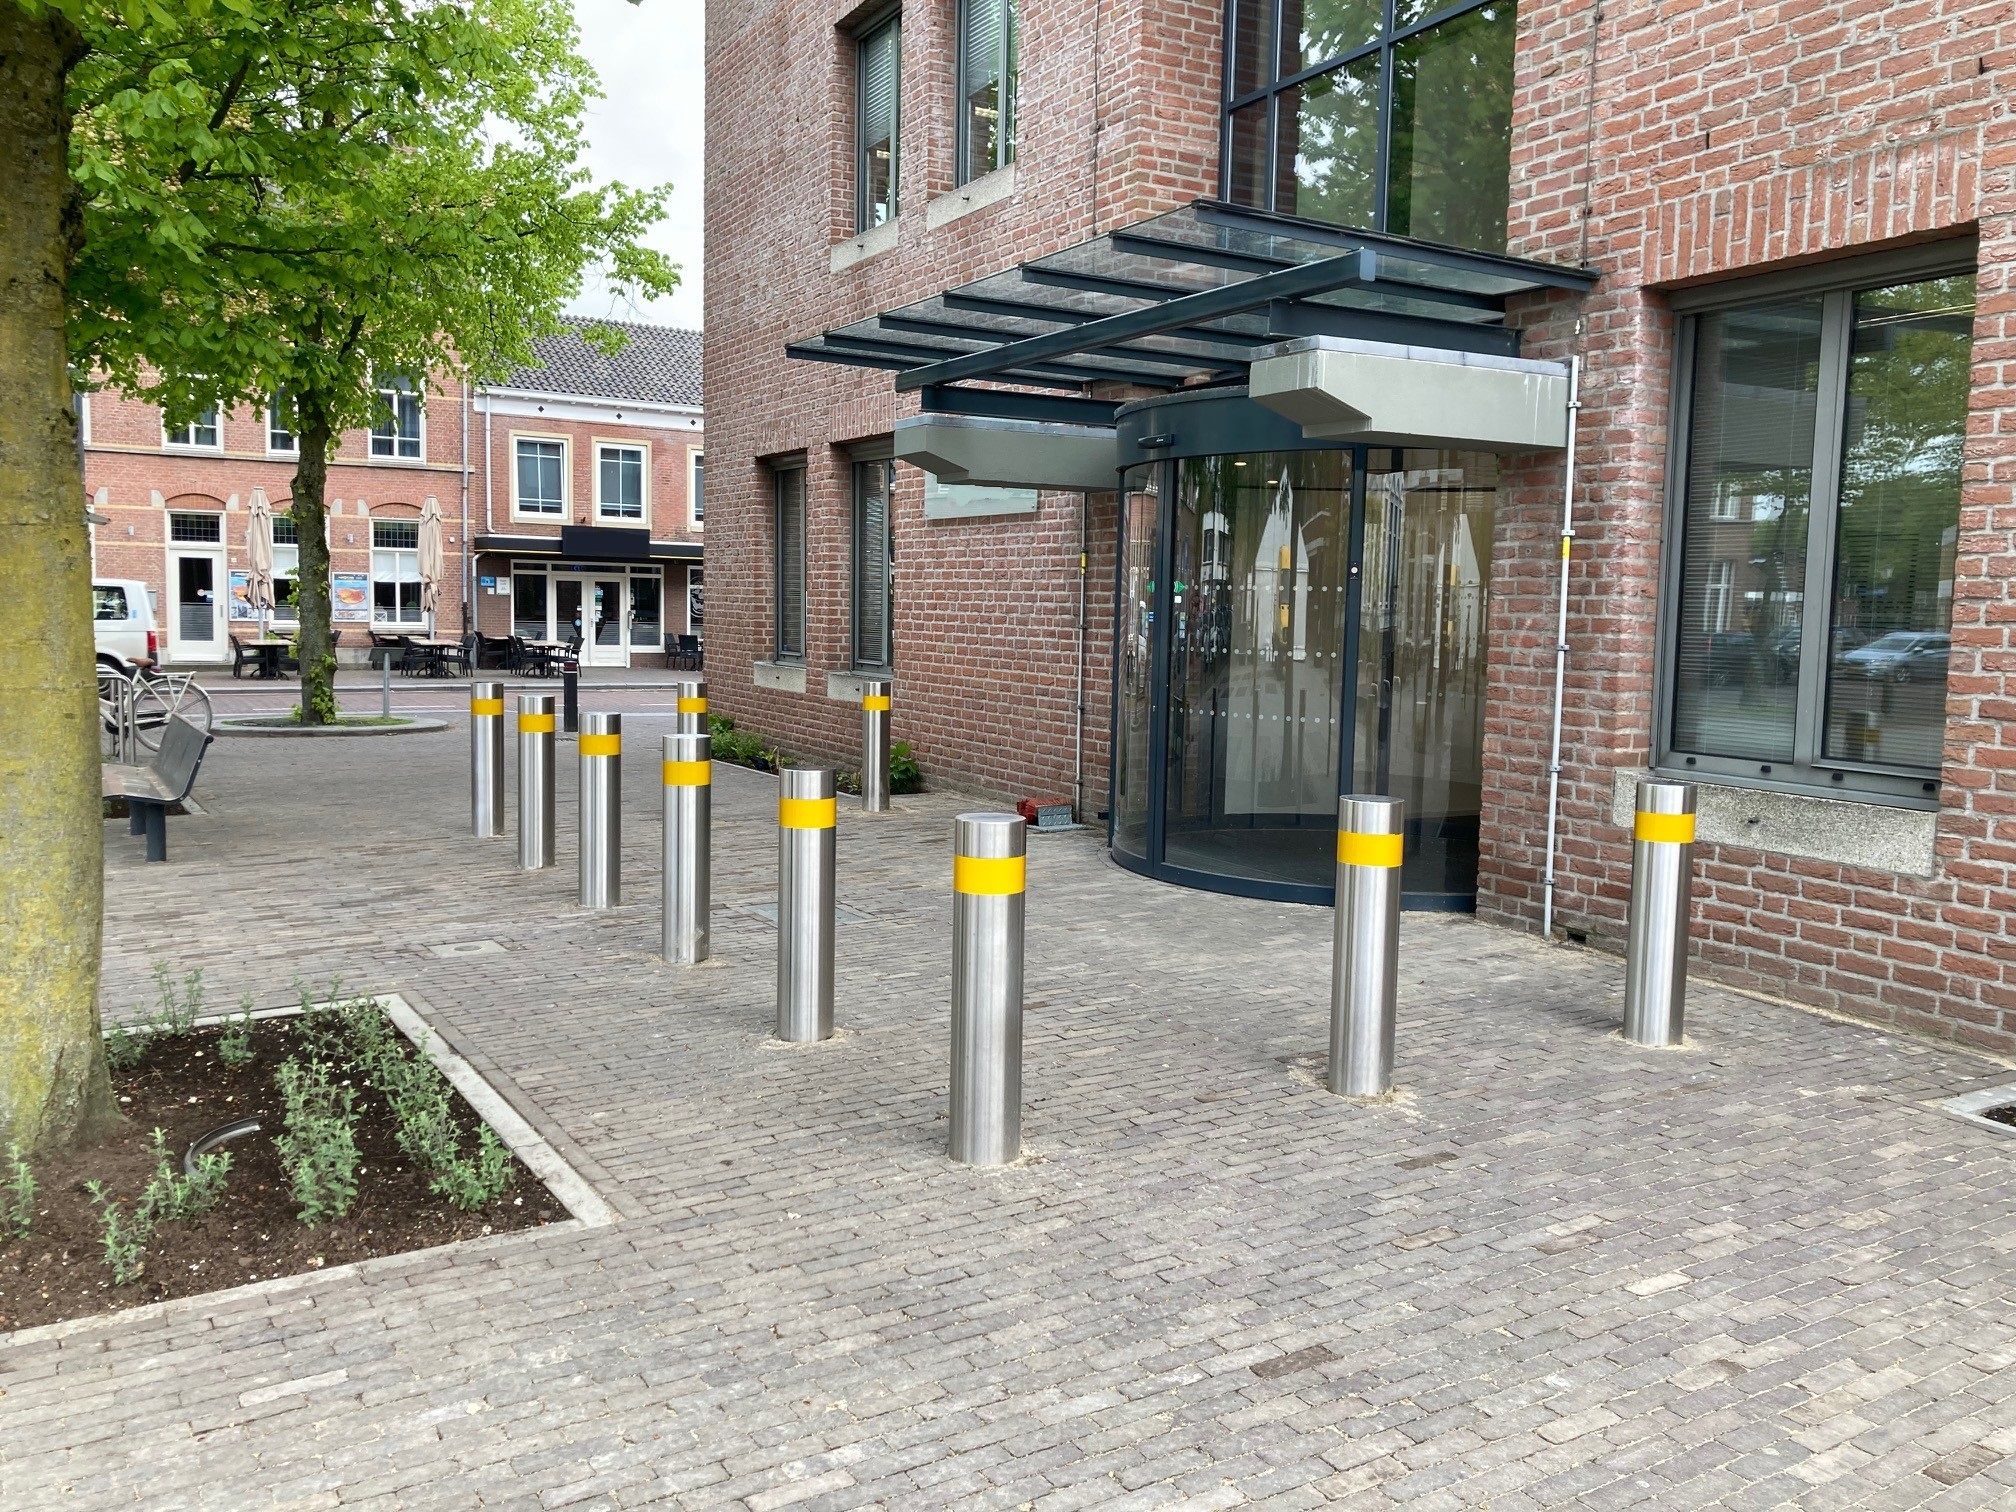 Bollards to protect municipal institutions